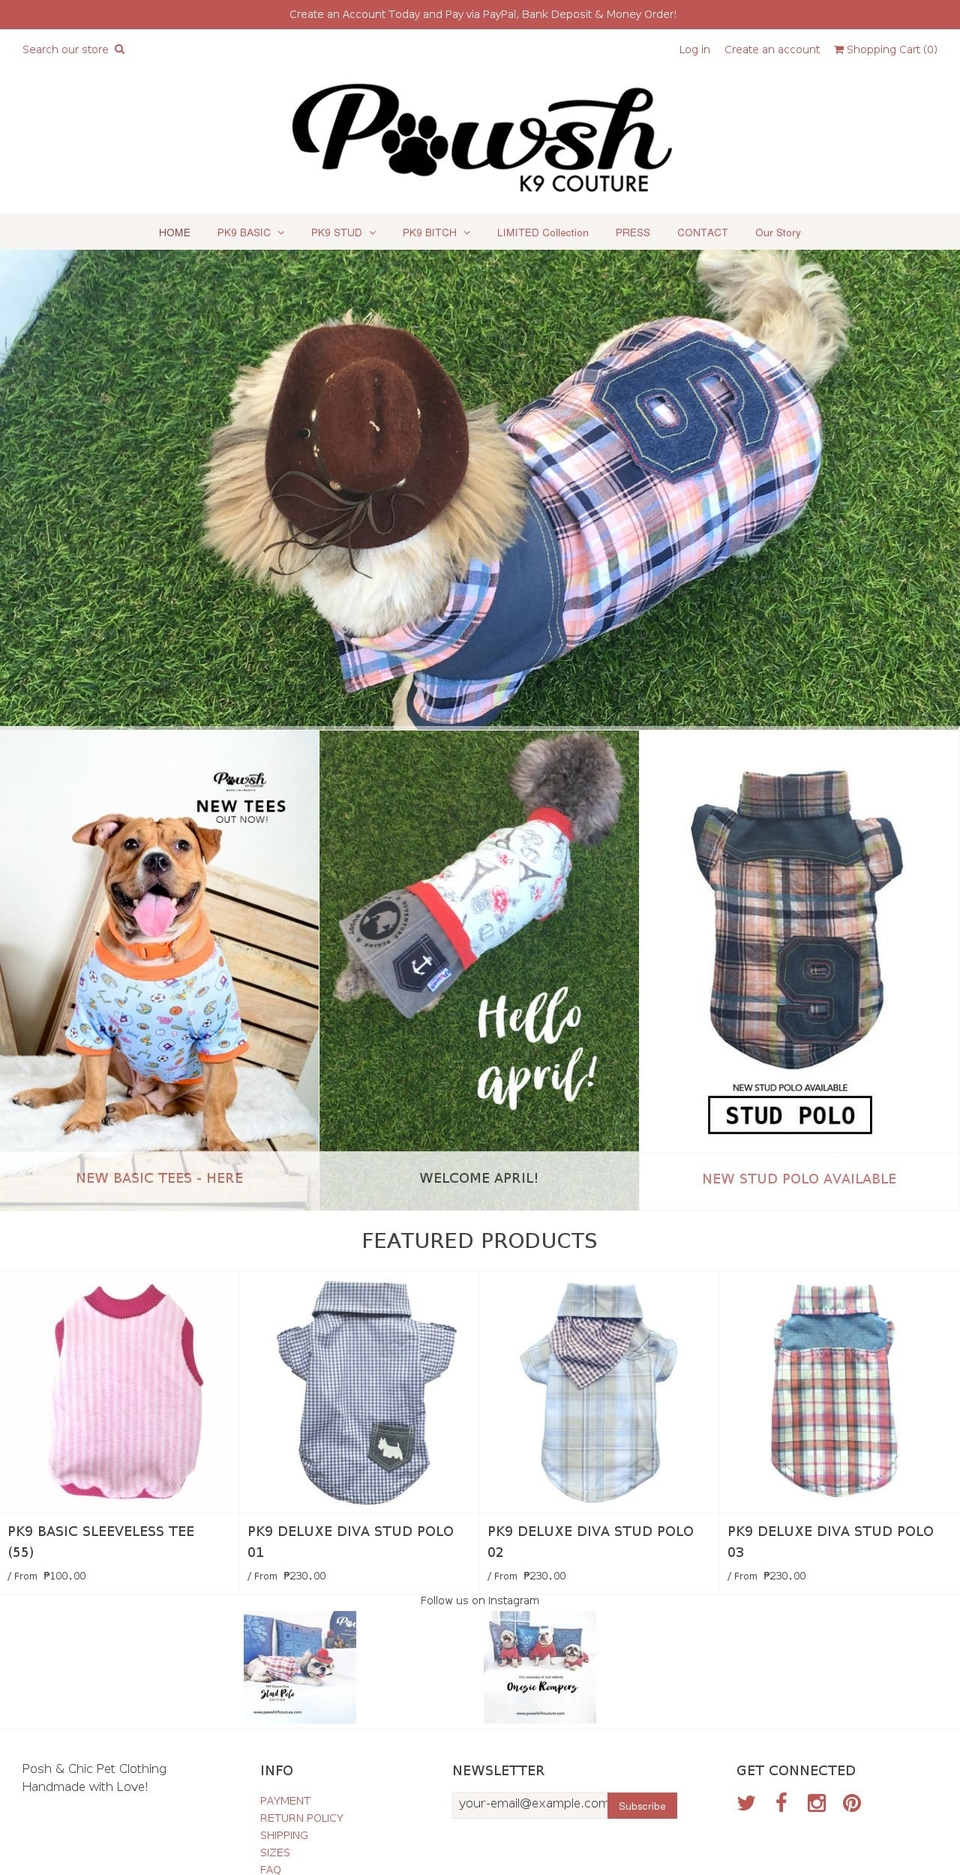 Weekend Shopify theme site example pawshk9couture.com